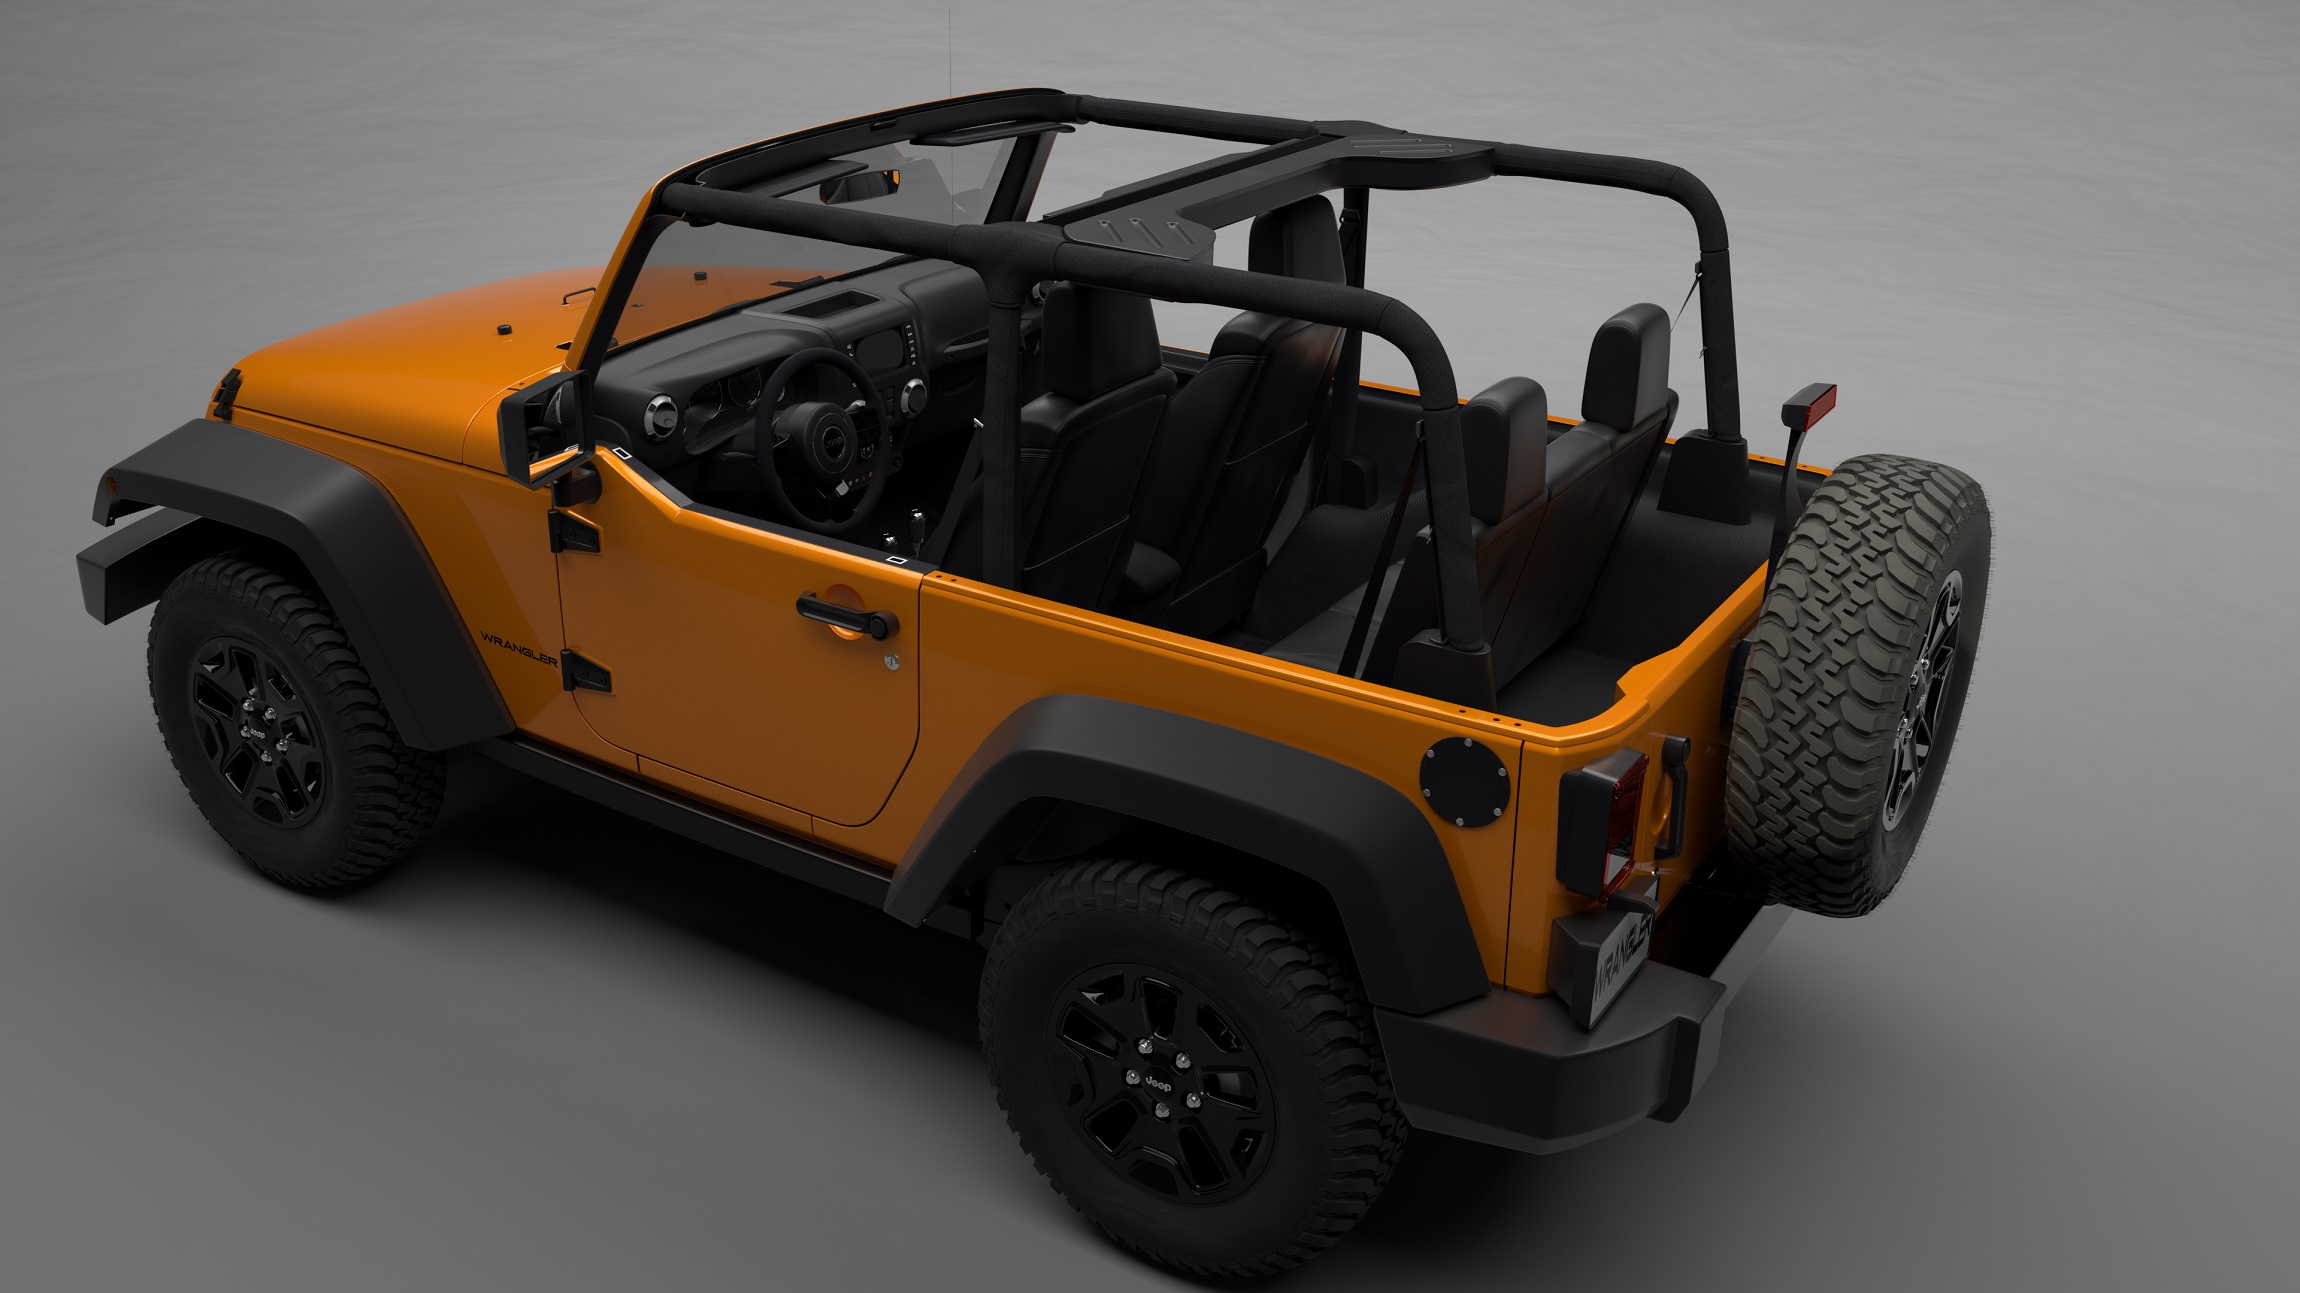 Jeep Wrangler - Open top - Finished Projects - Blender Artists Community